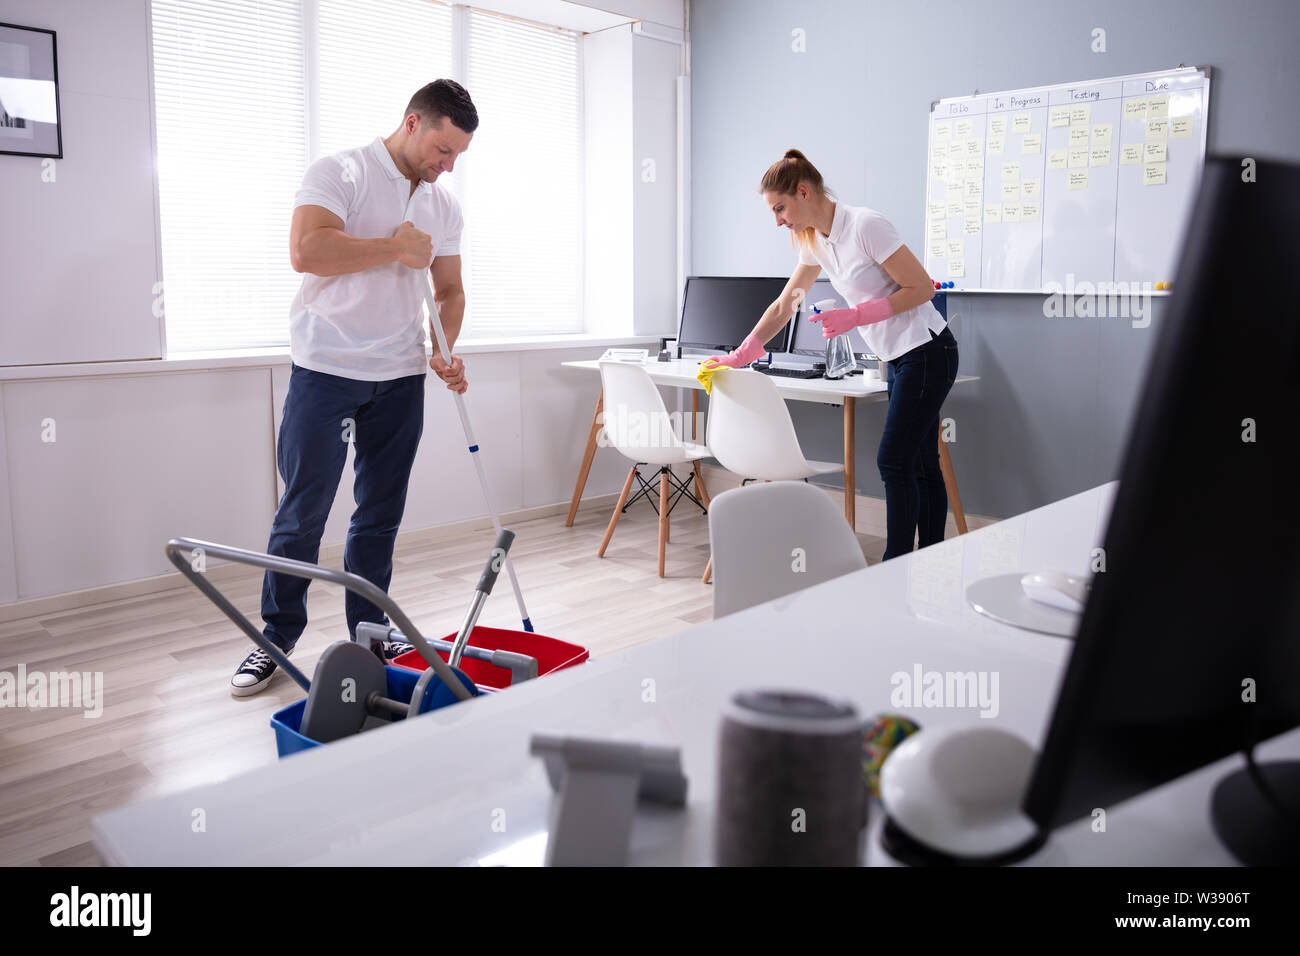 Two Smiling Young Janitor Cleaning The Desk And Mopping Floor In The Office Stock Photo